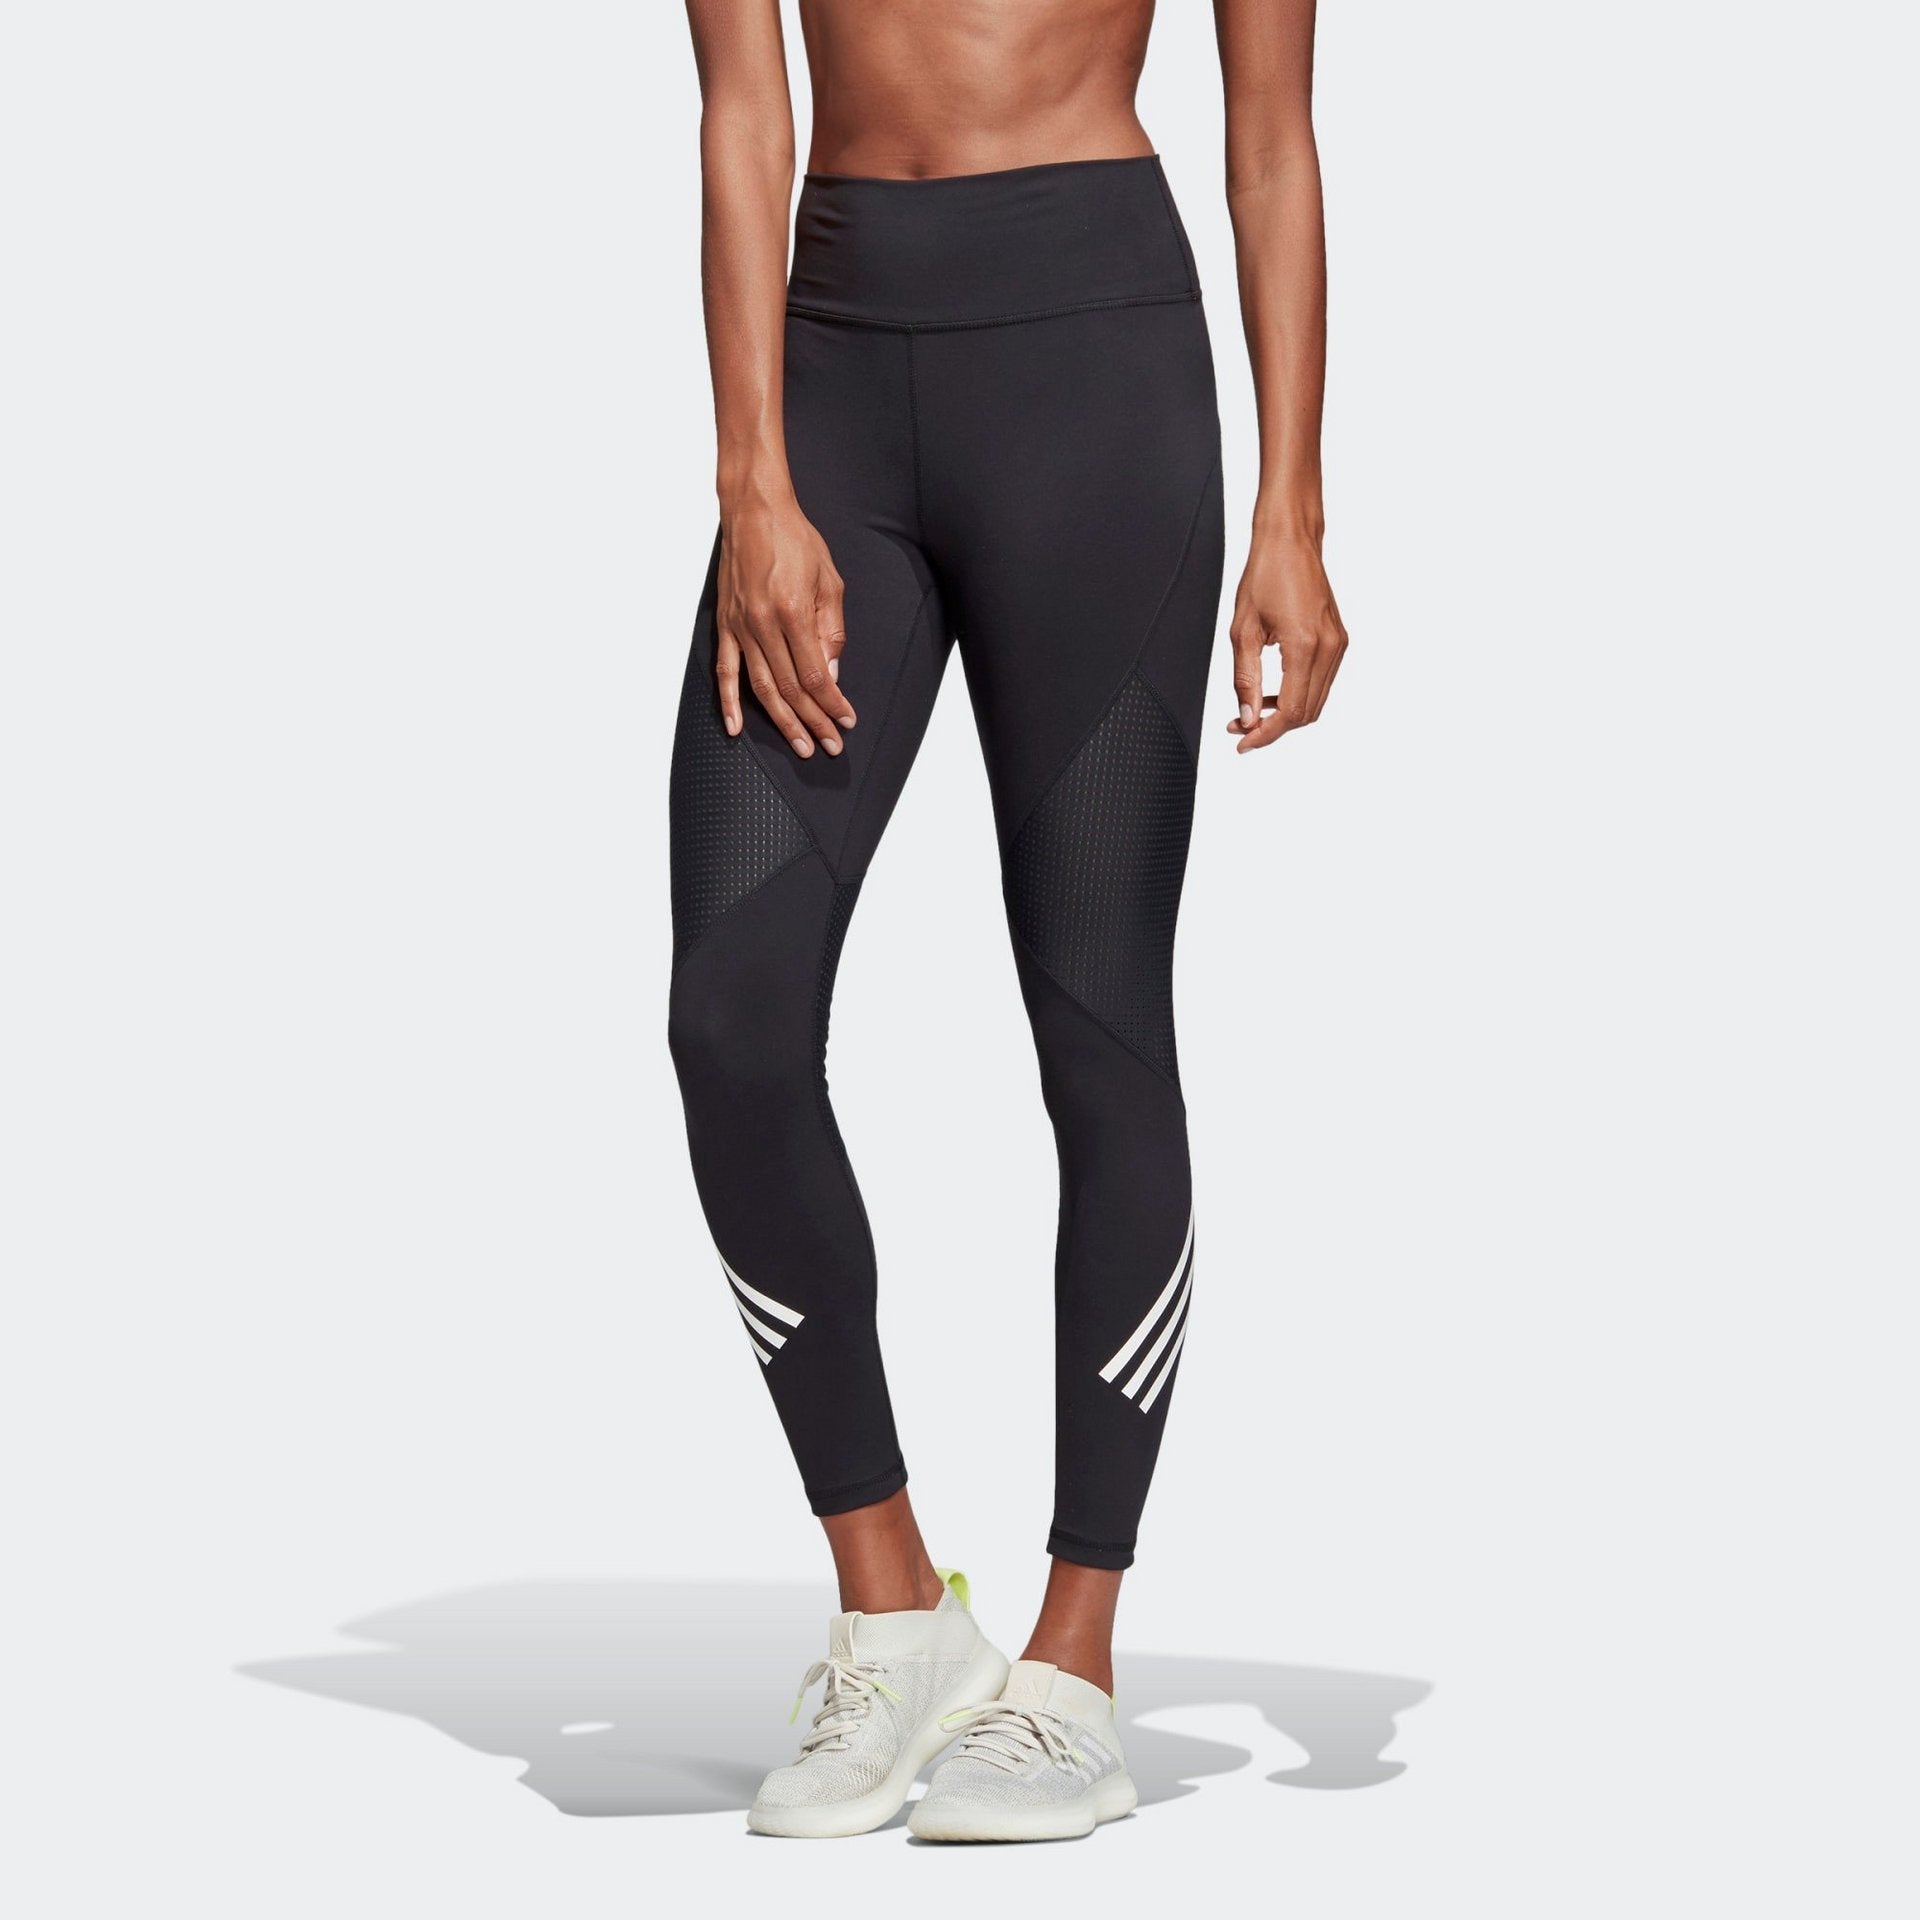 Adidas Womens Believe This High Rise 7/8 Tight Black/White